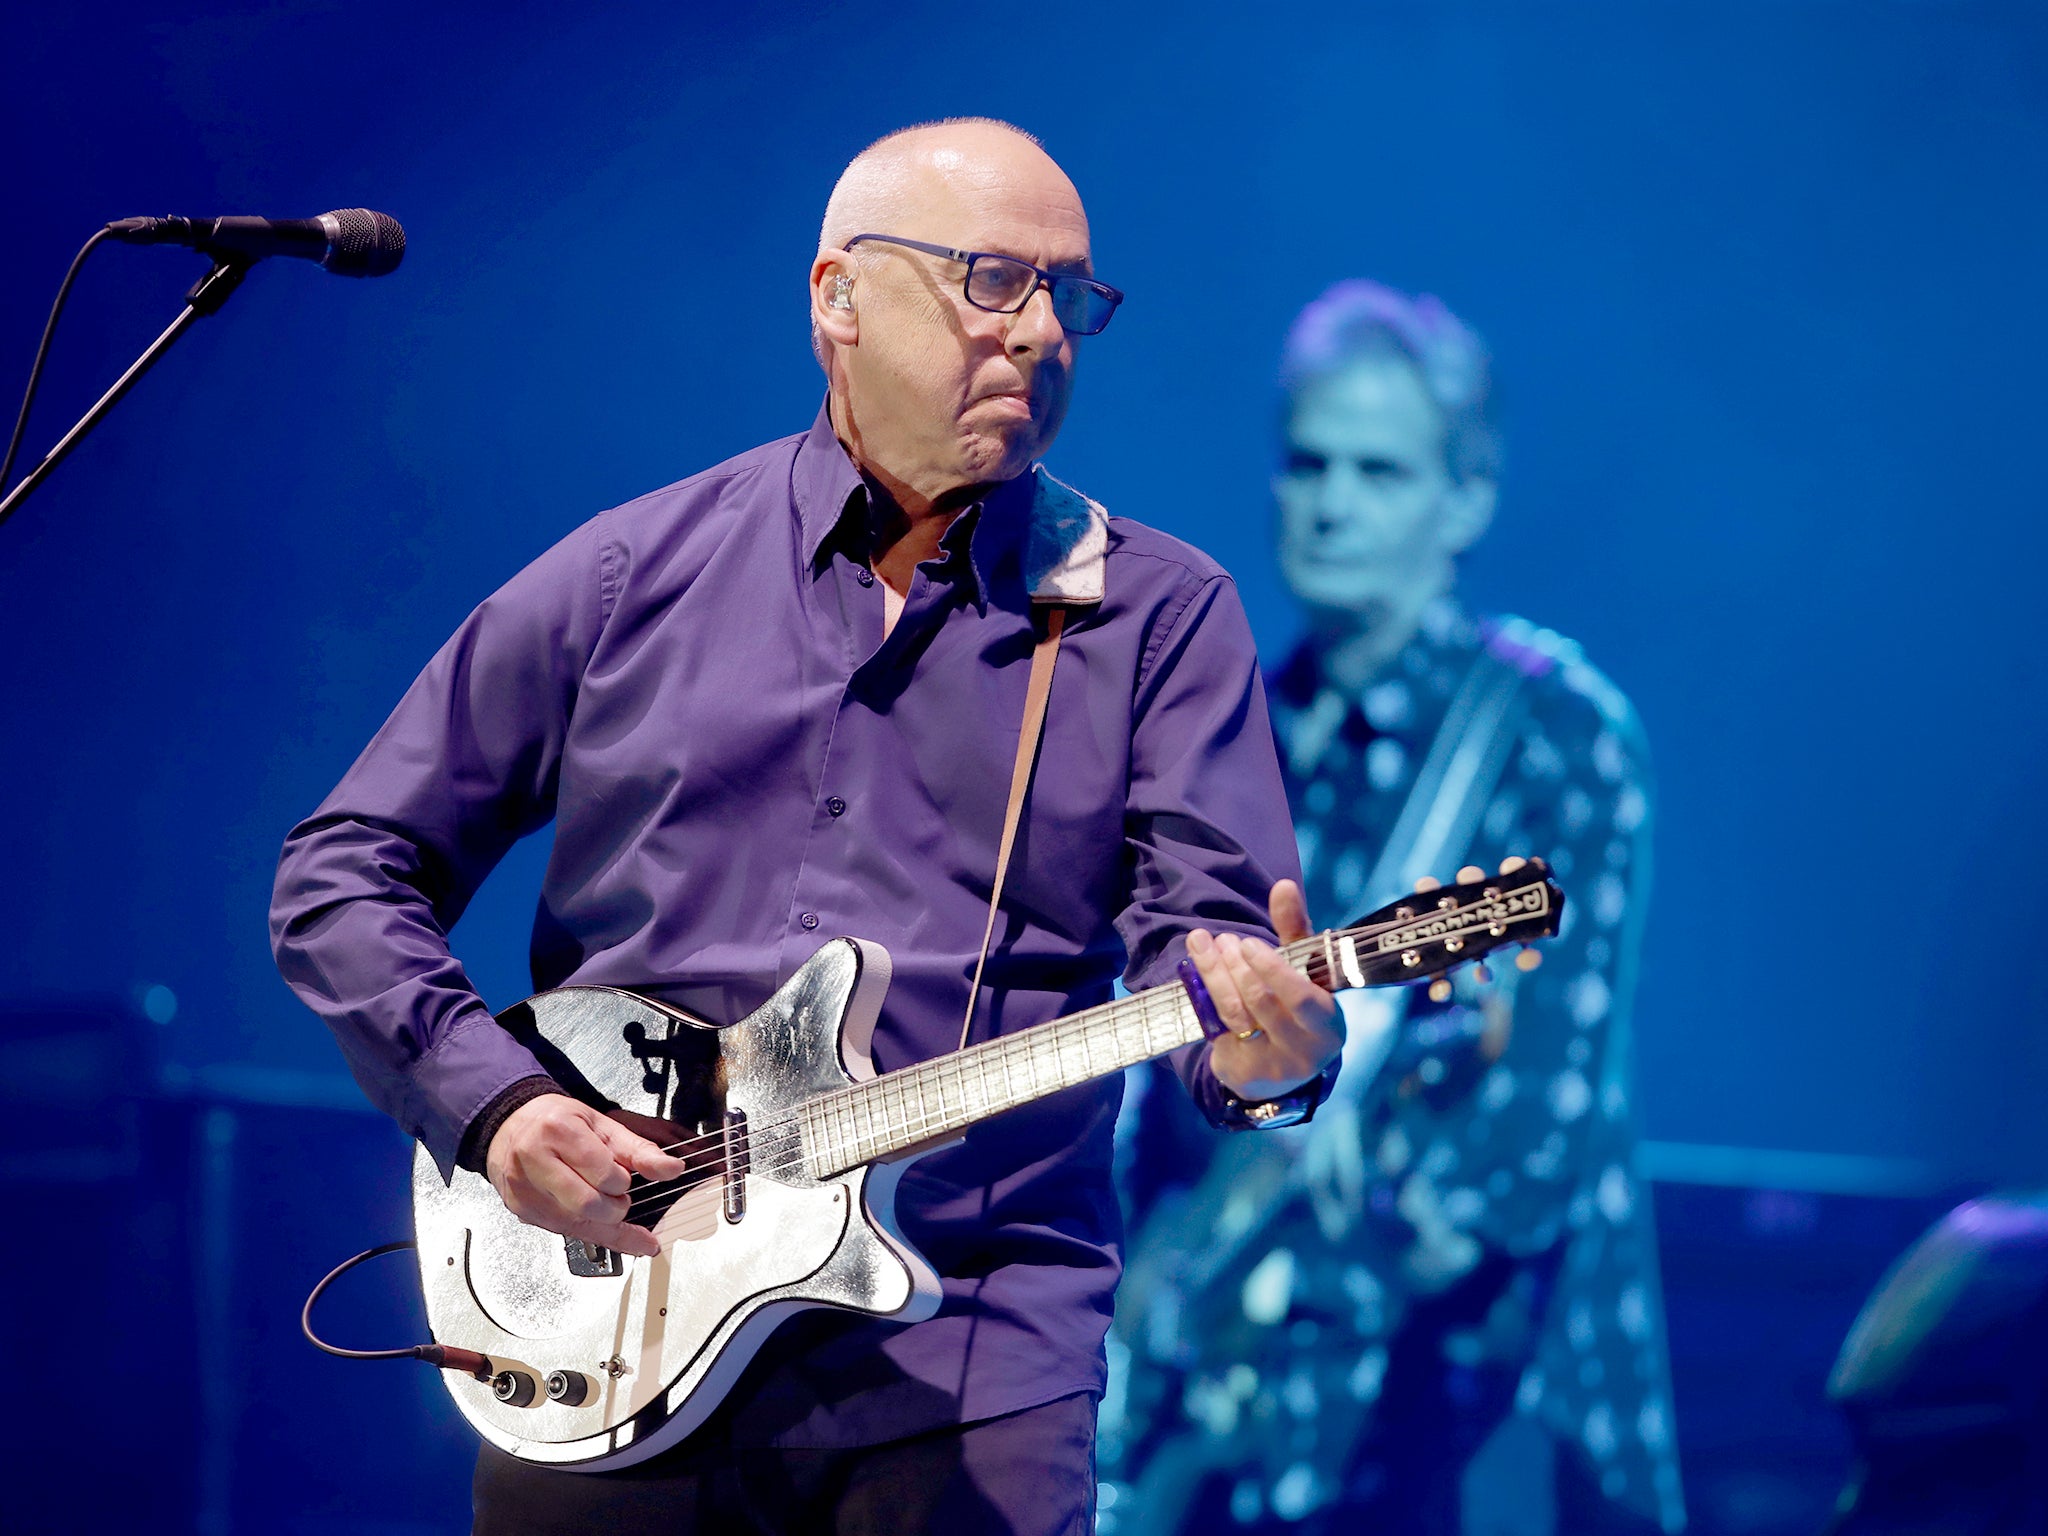 Mark Knopfler gathered together some of the world’s greatest guitarists